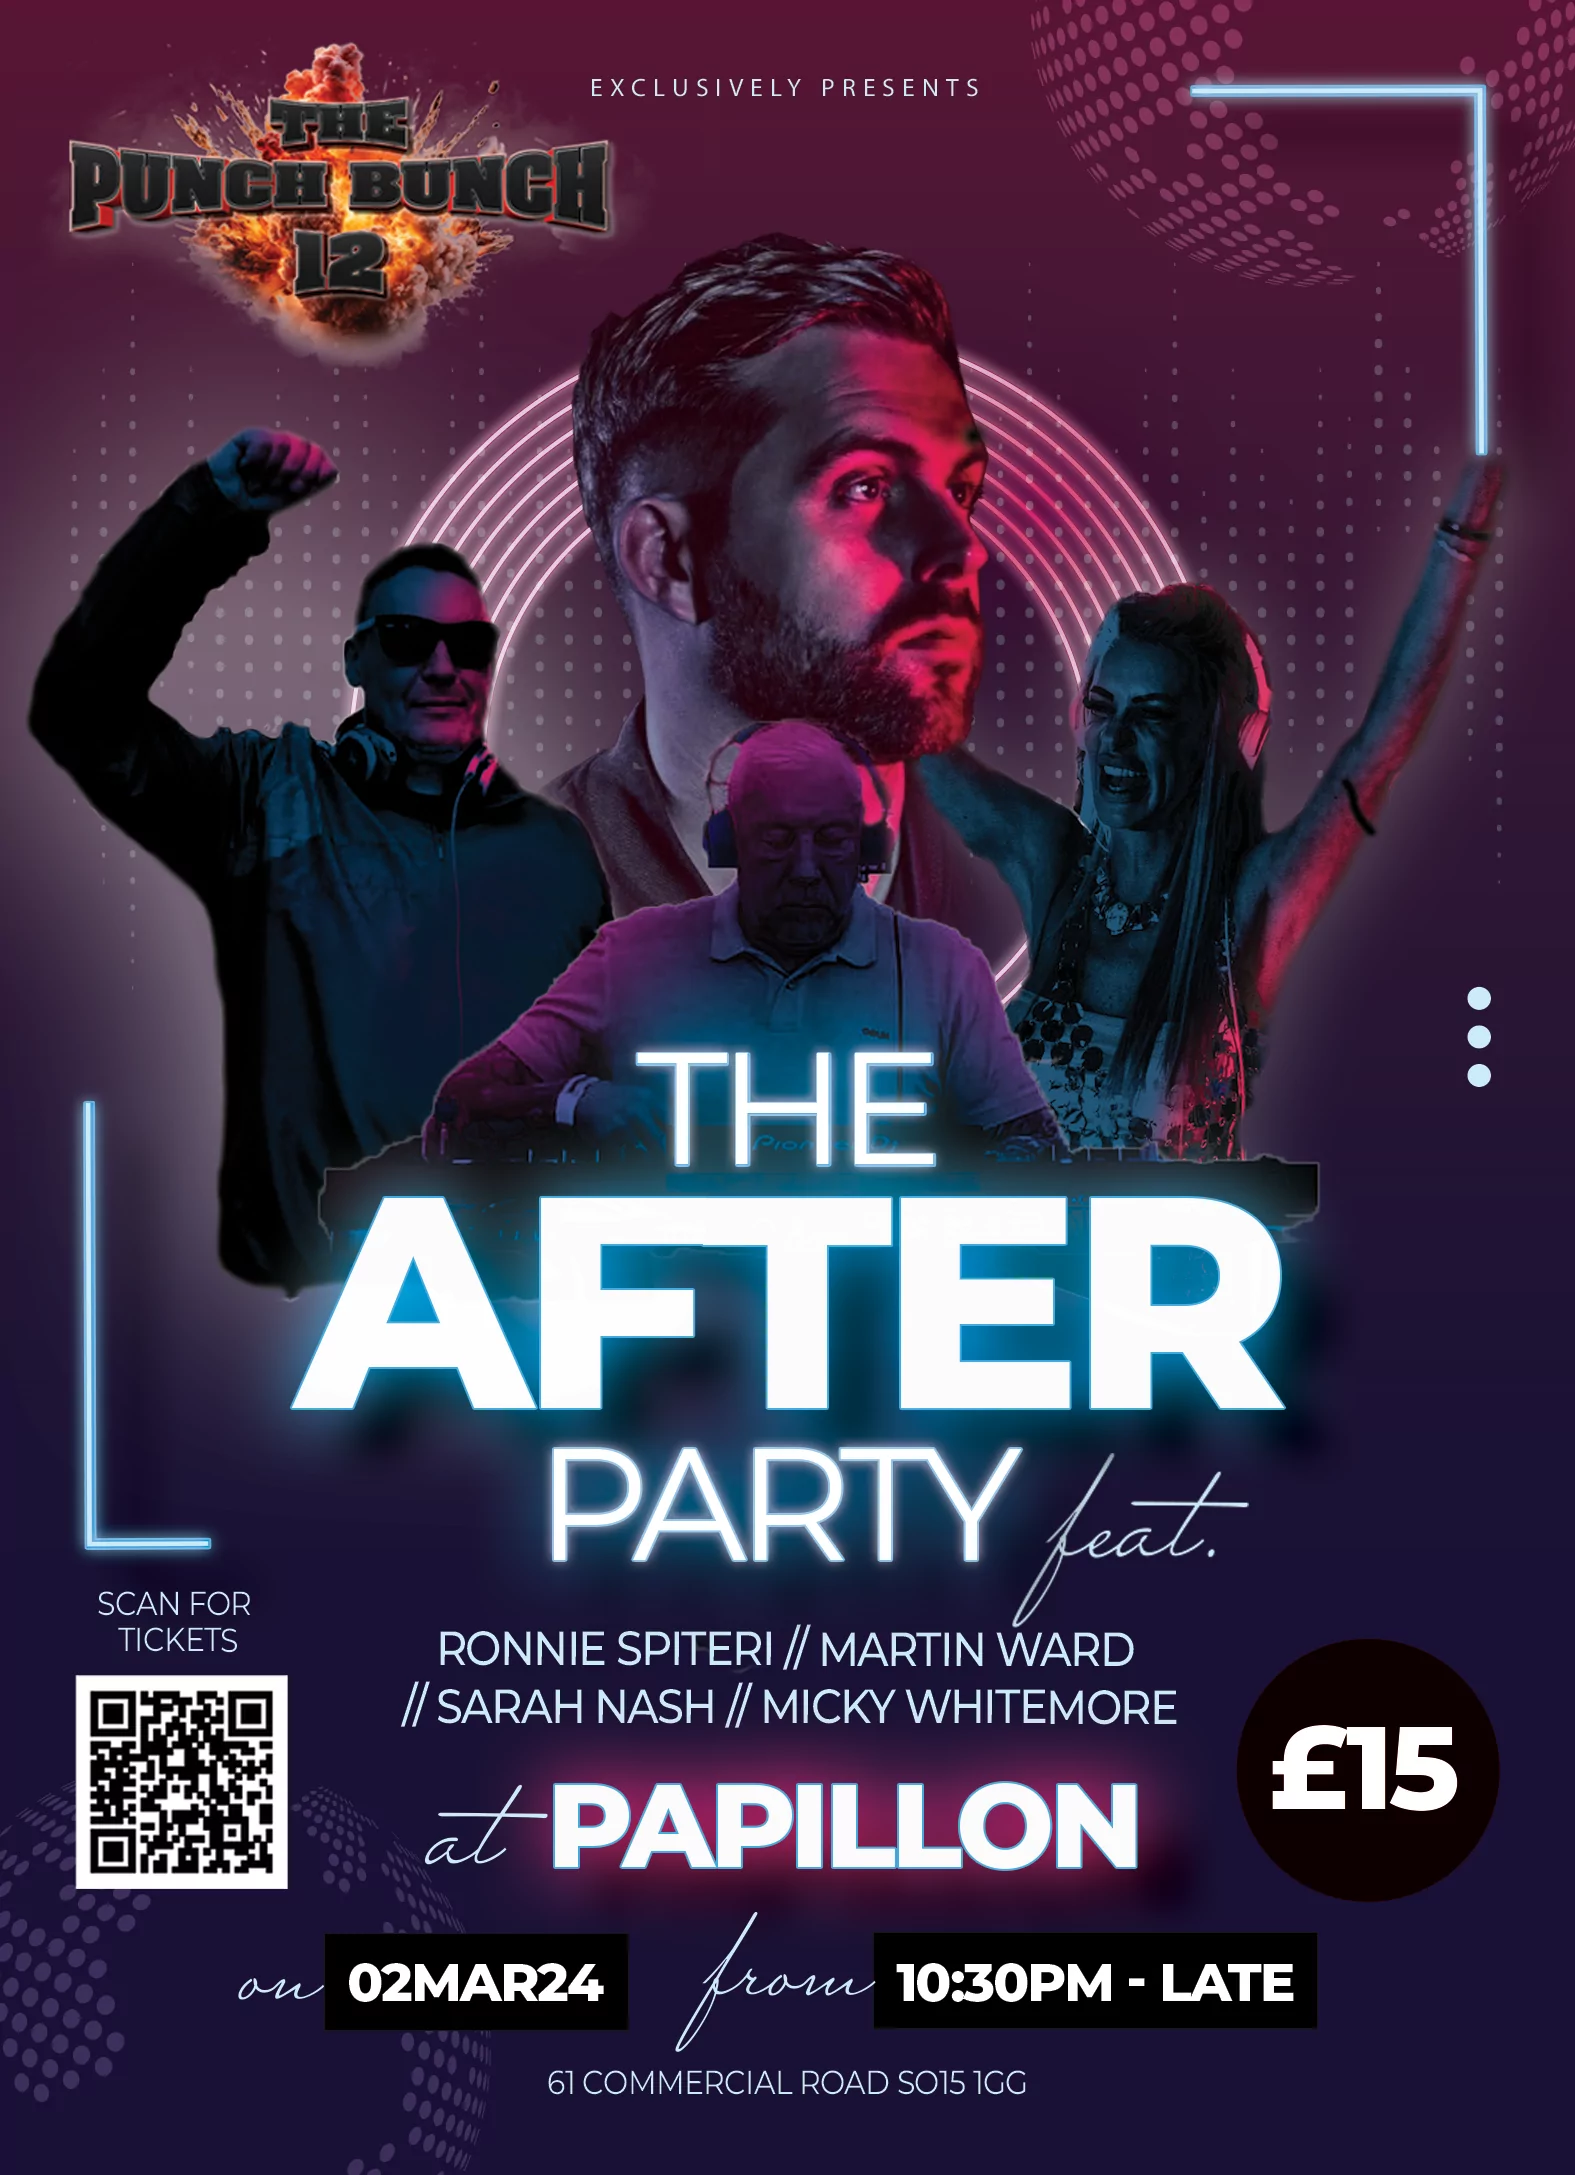 The After Party – The Punch Bunch